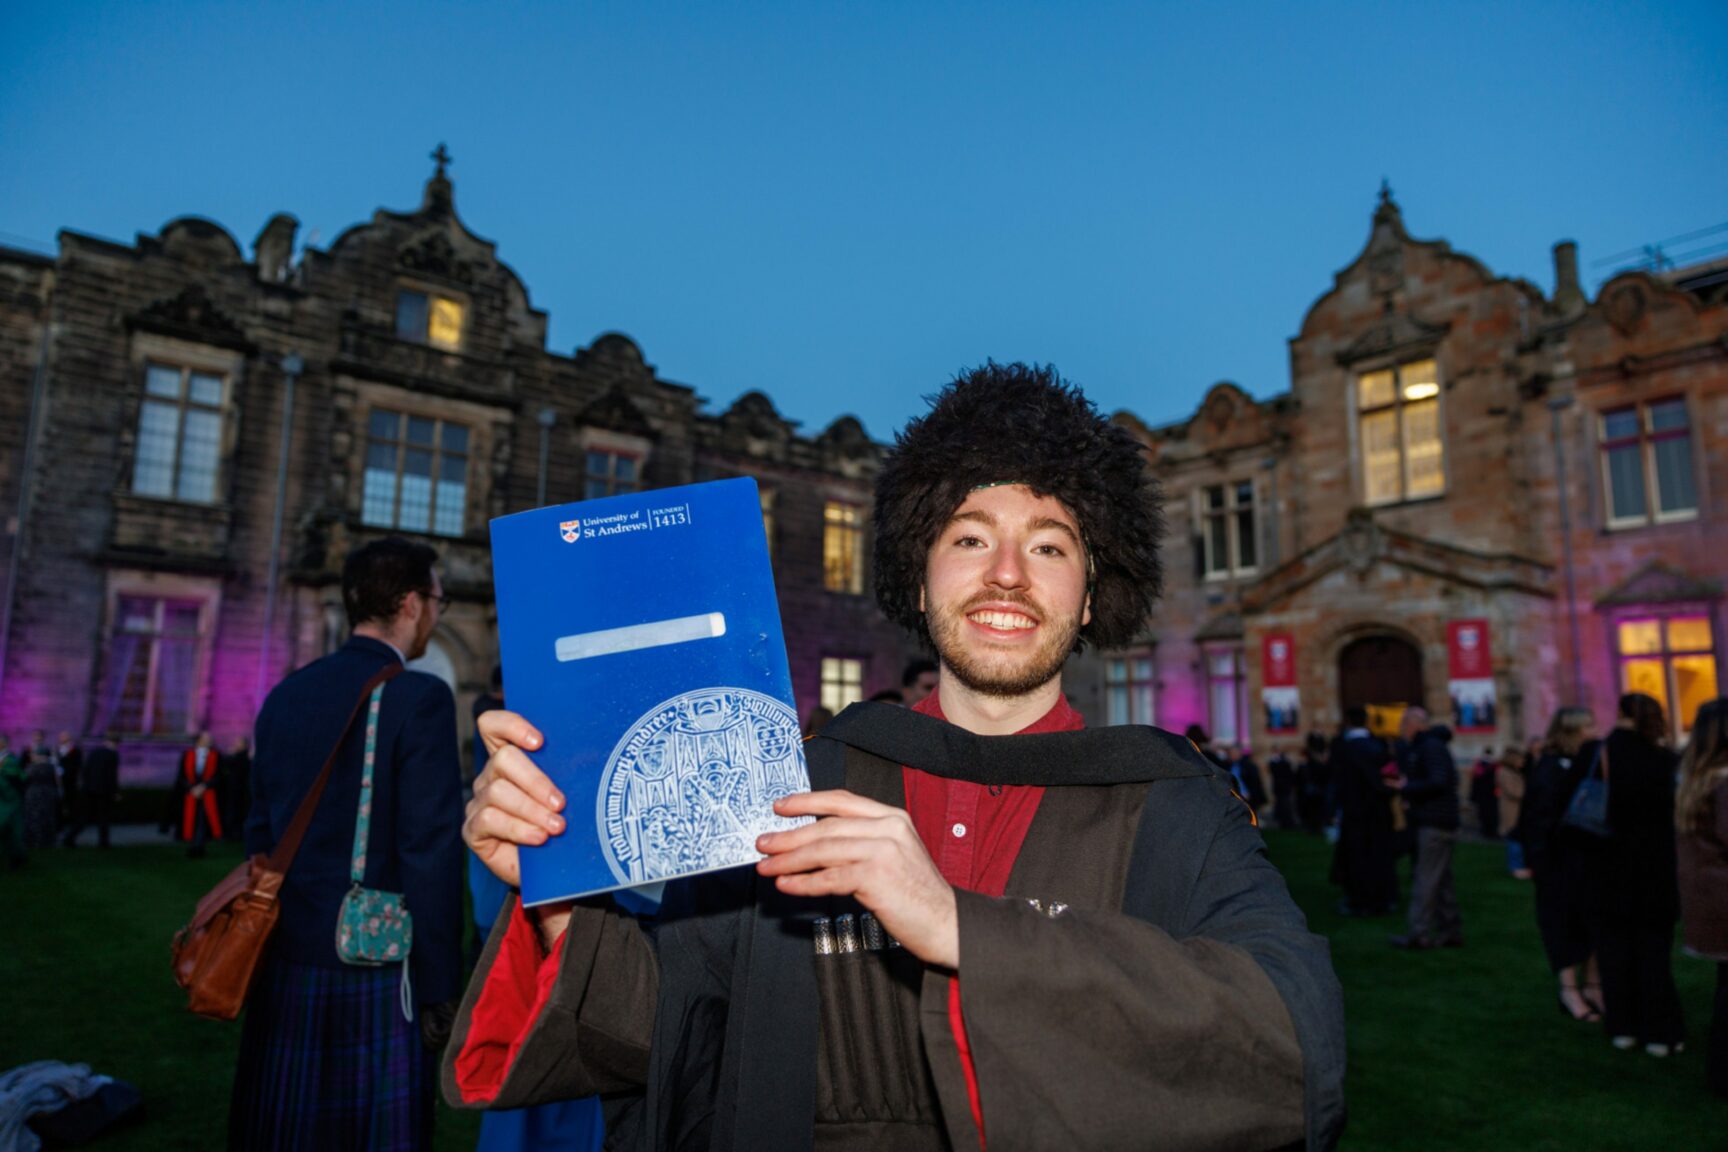 First day of St Andrews winter graduation ceremonies